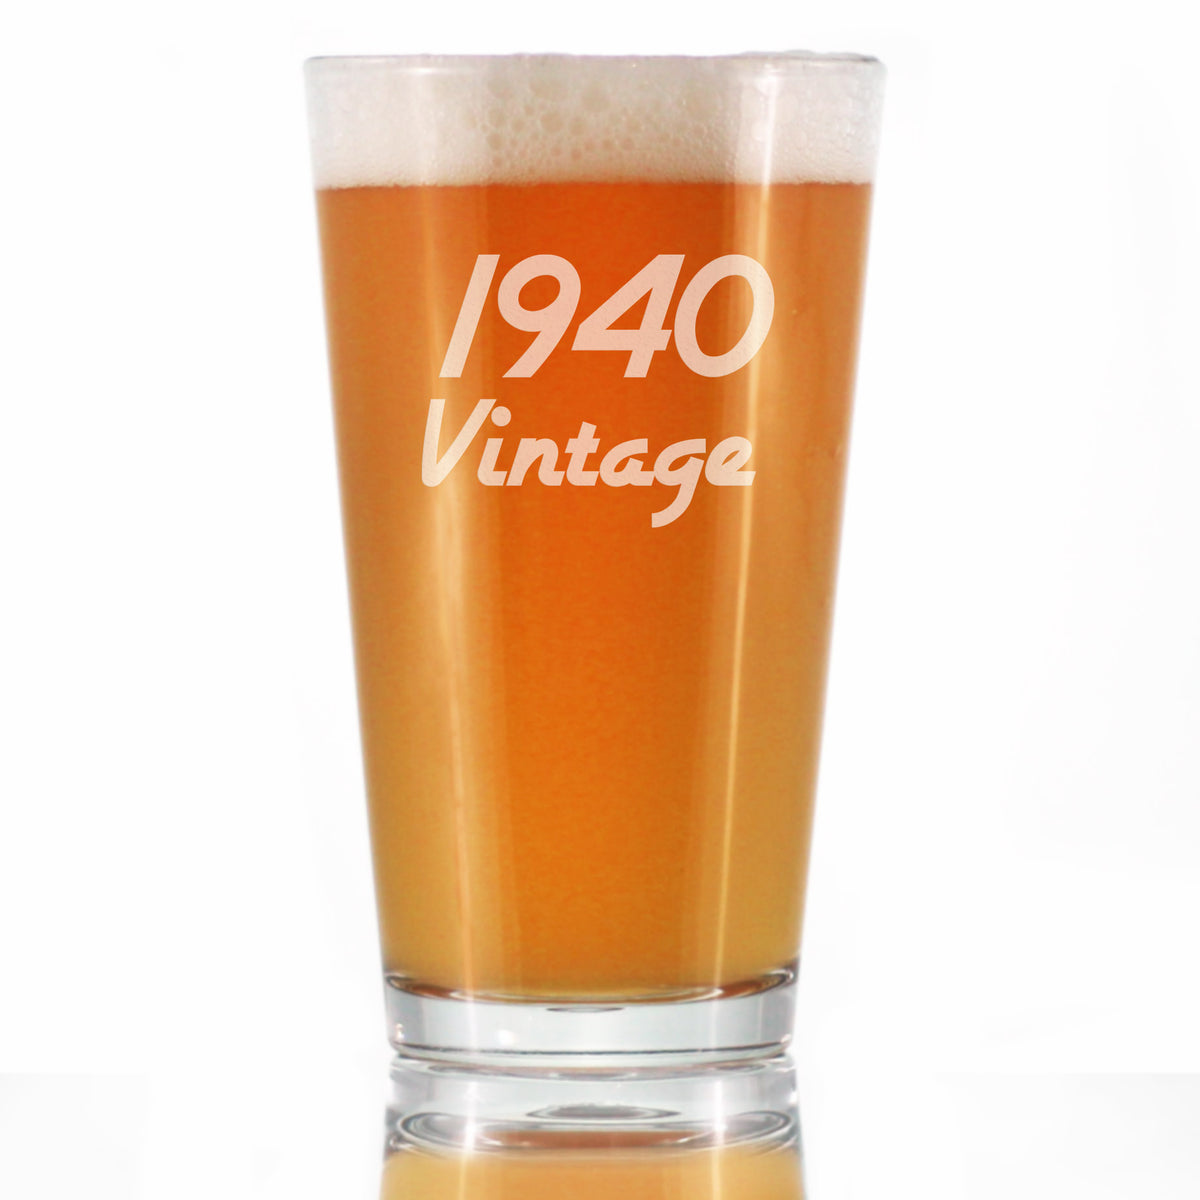 Vintage 1940 - Pint Glass for Beer - 84th Birthday Gifts for Men or Women Turning 84 - Fun Bday Party Decor - 16 oz